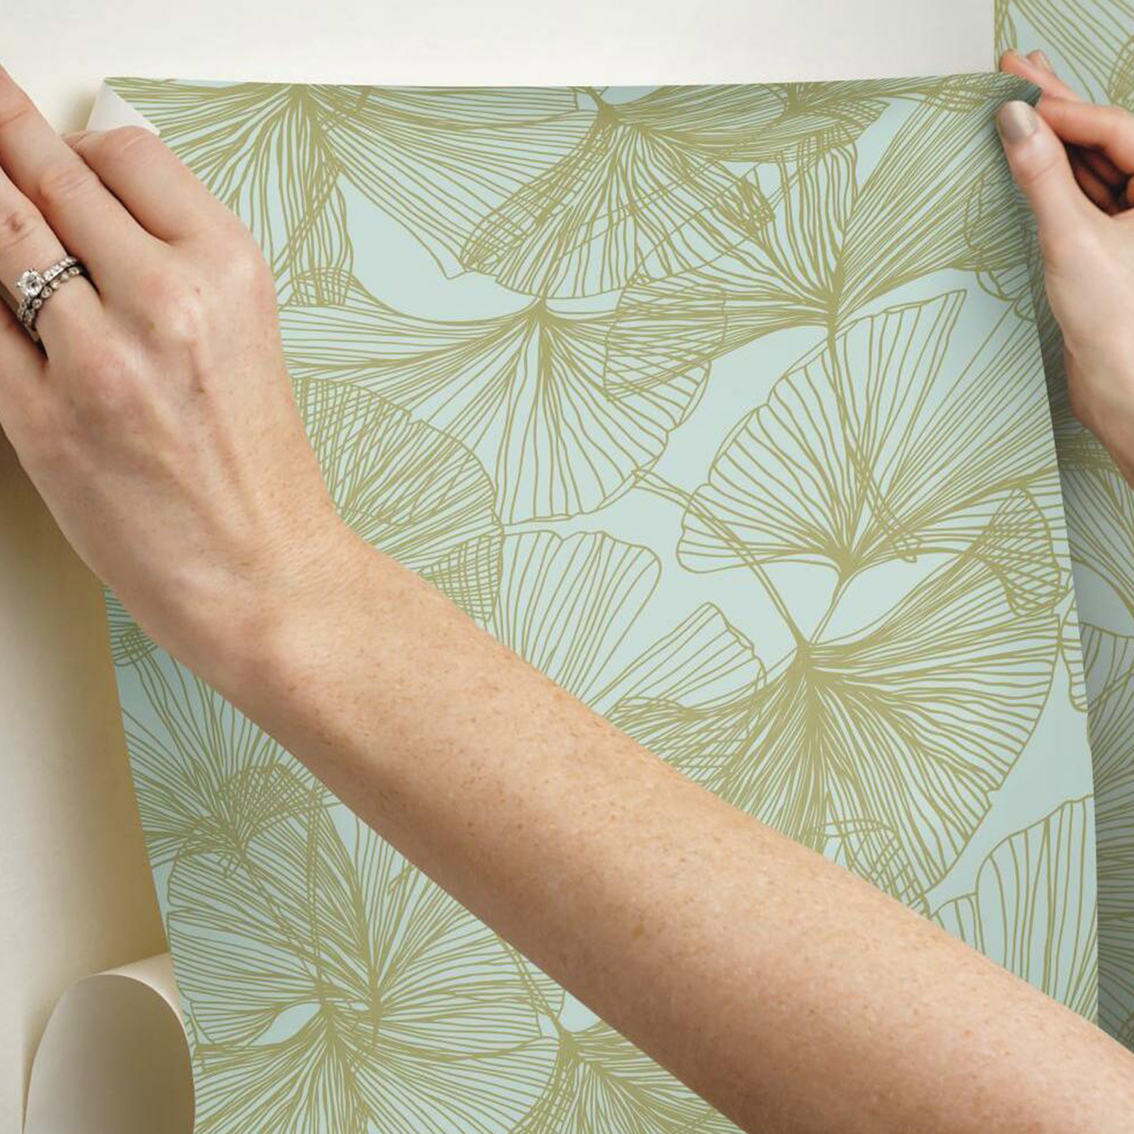 RoomMates Gingko Leaves Peel and Stick Wallpaper - Image 3 of 8